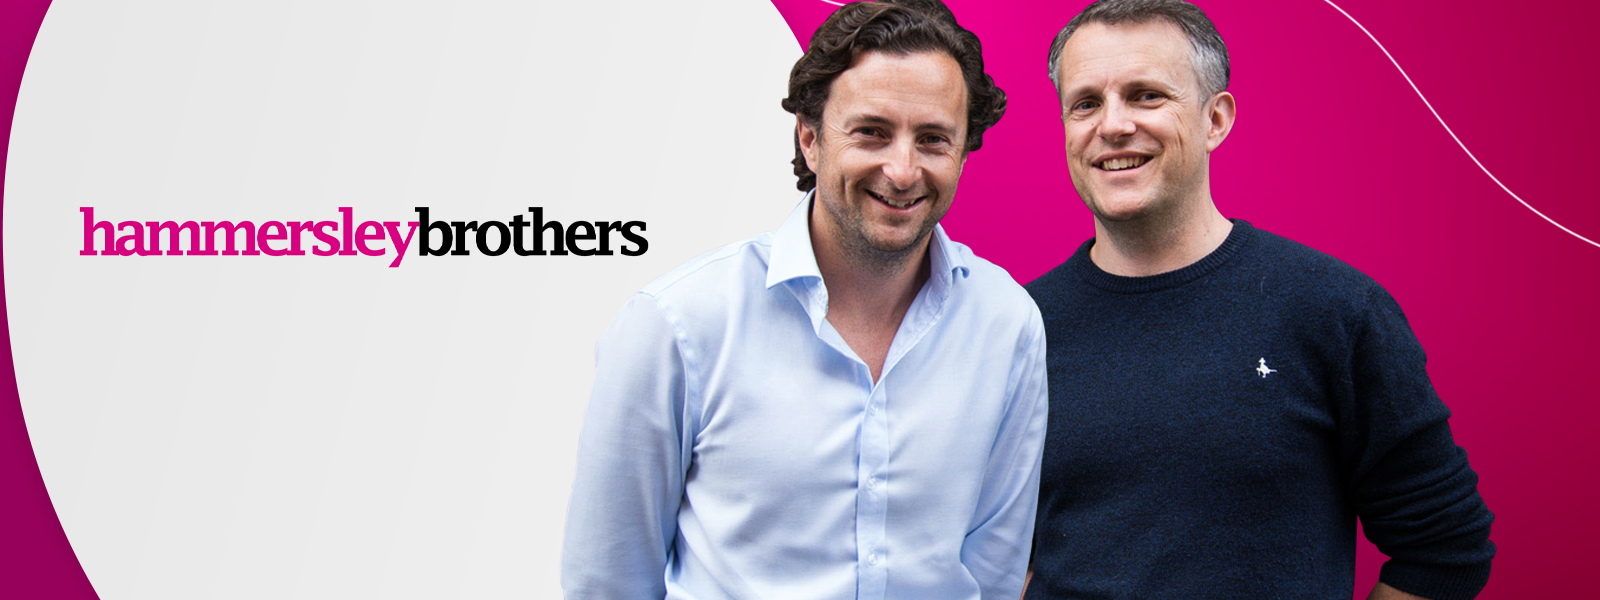 Ecommerce: The Hammersley Brothers Ecommerce Podcast